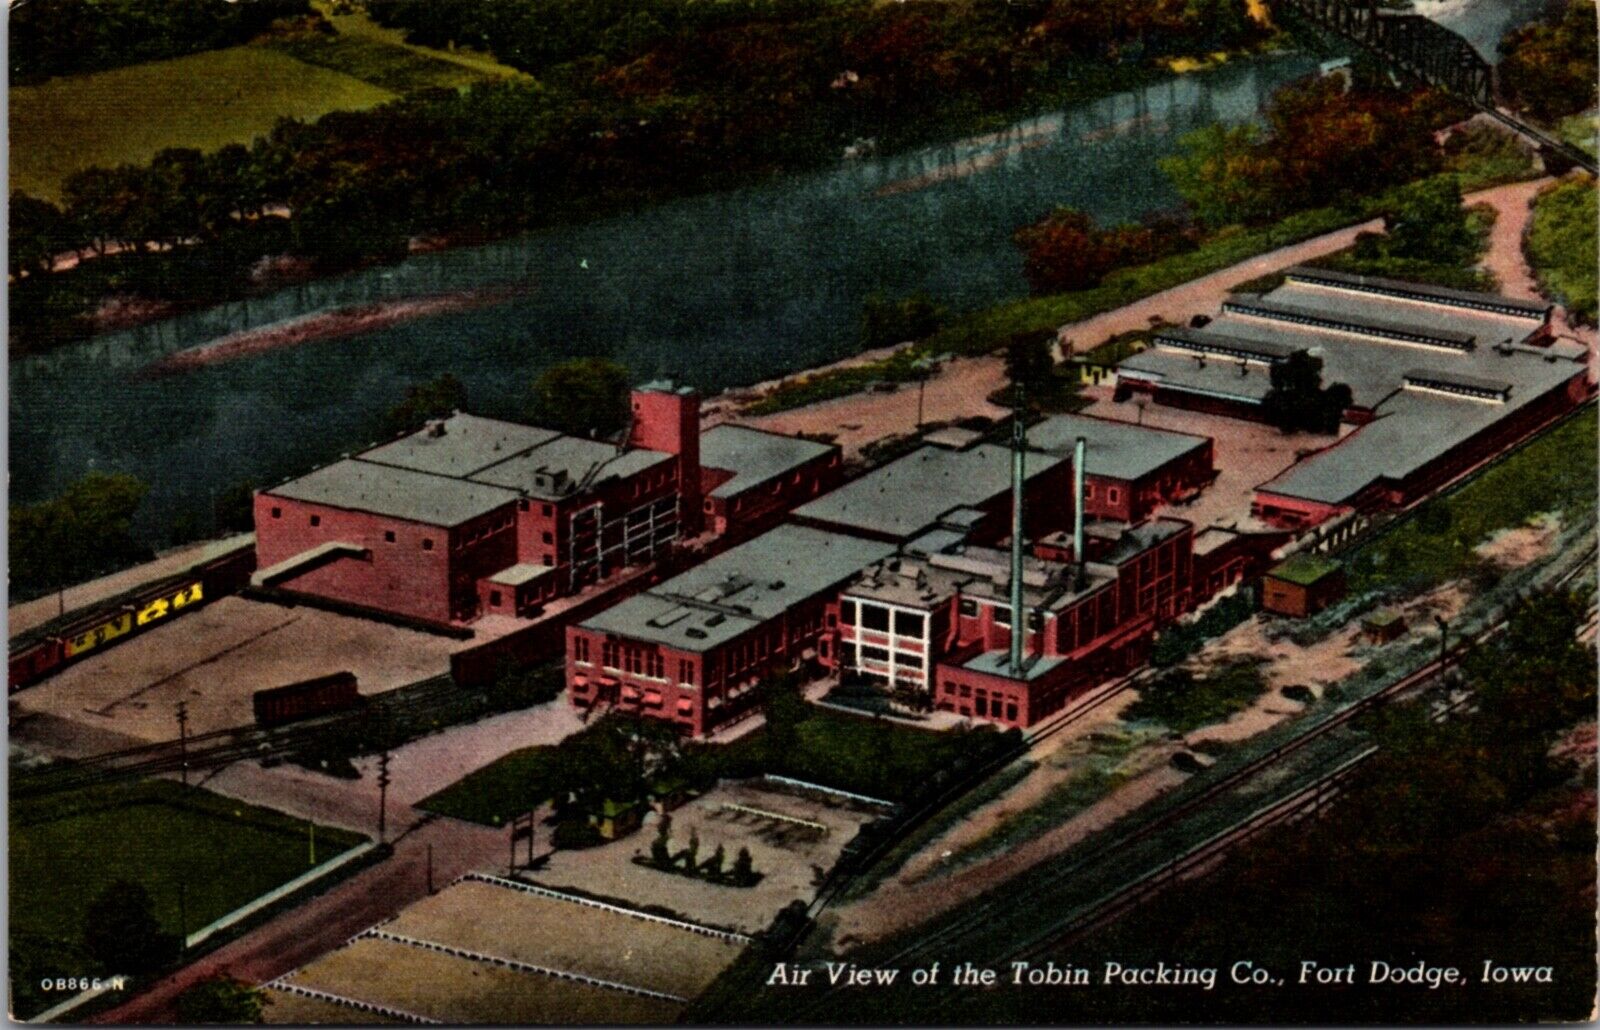 Linen Postcard Air View of the Tobin Packing Co in Fort Dodge, Iowa